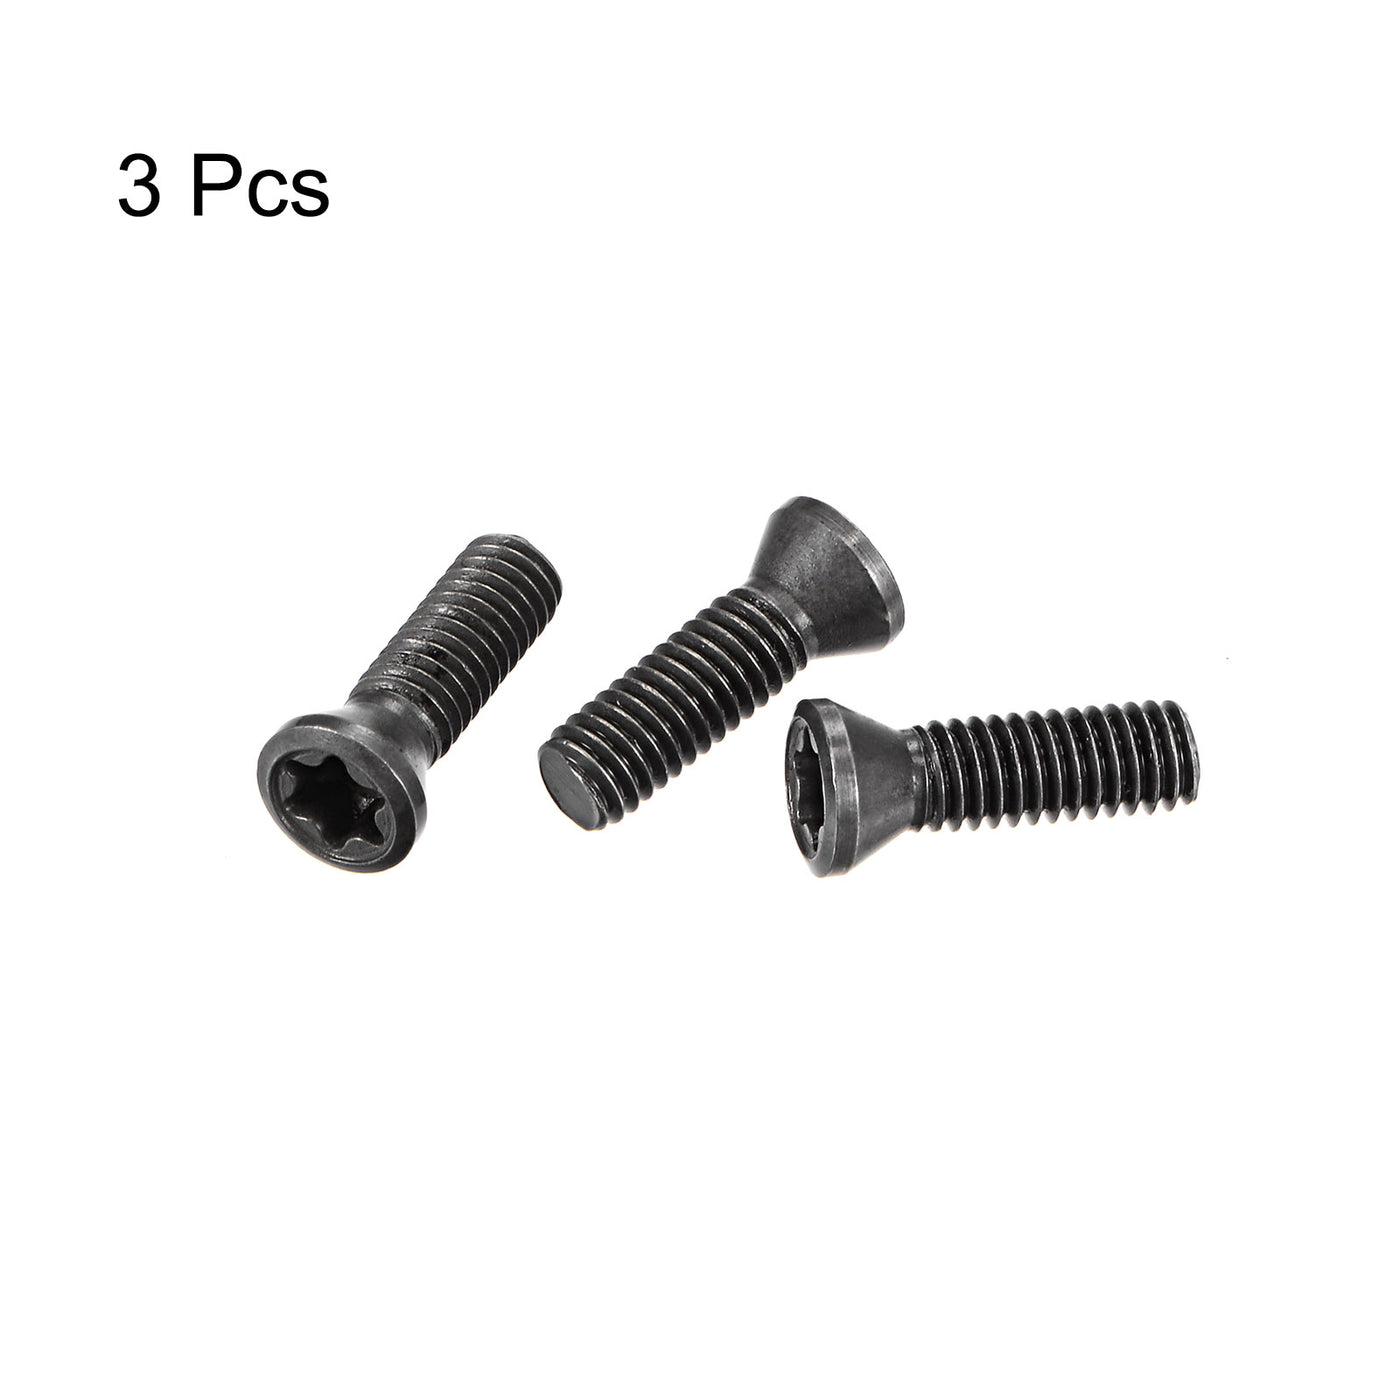 Uxcell Uxcell M3.5-0.6 Torx Set Screws for Carbide Insert Lathe Turning Tool Holder, 3Pcs